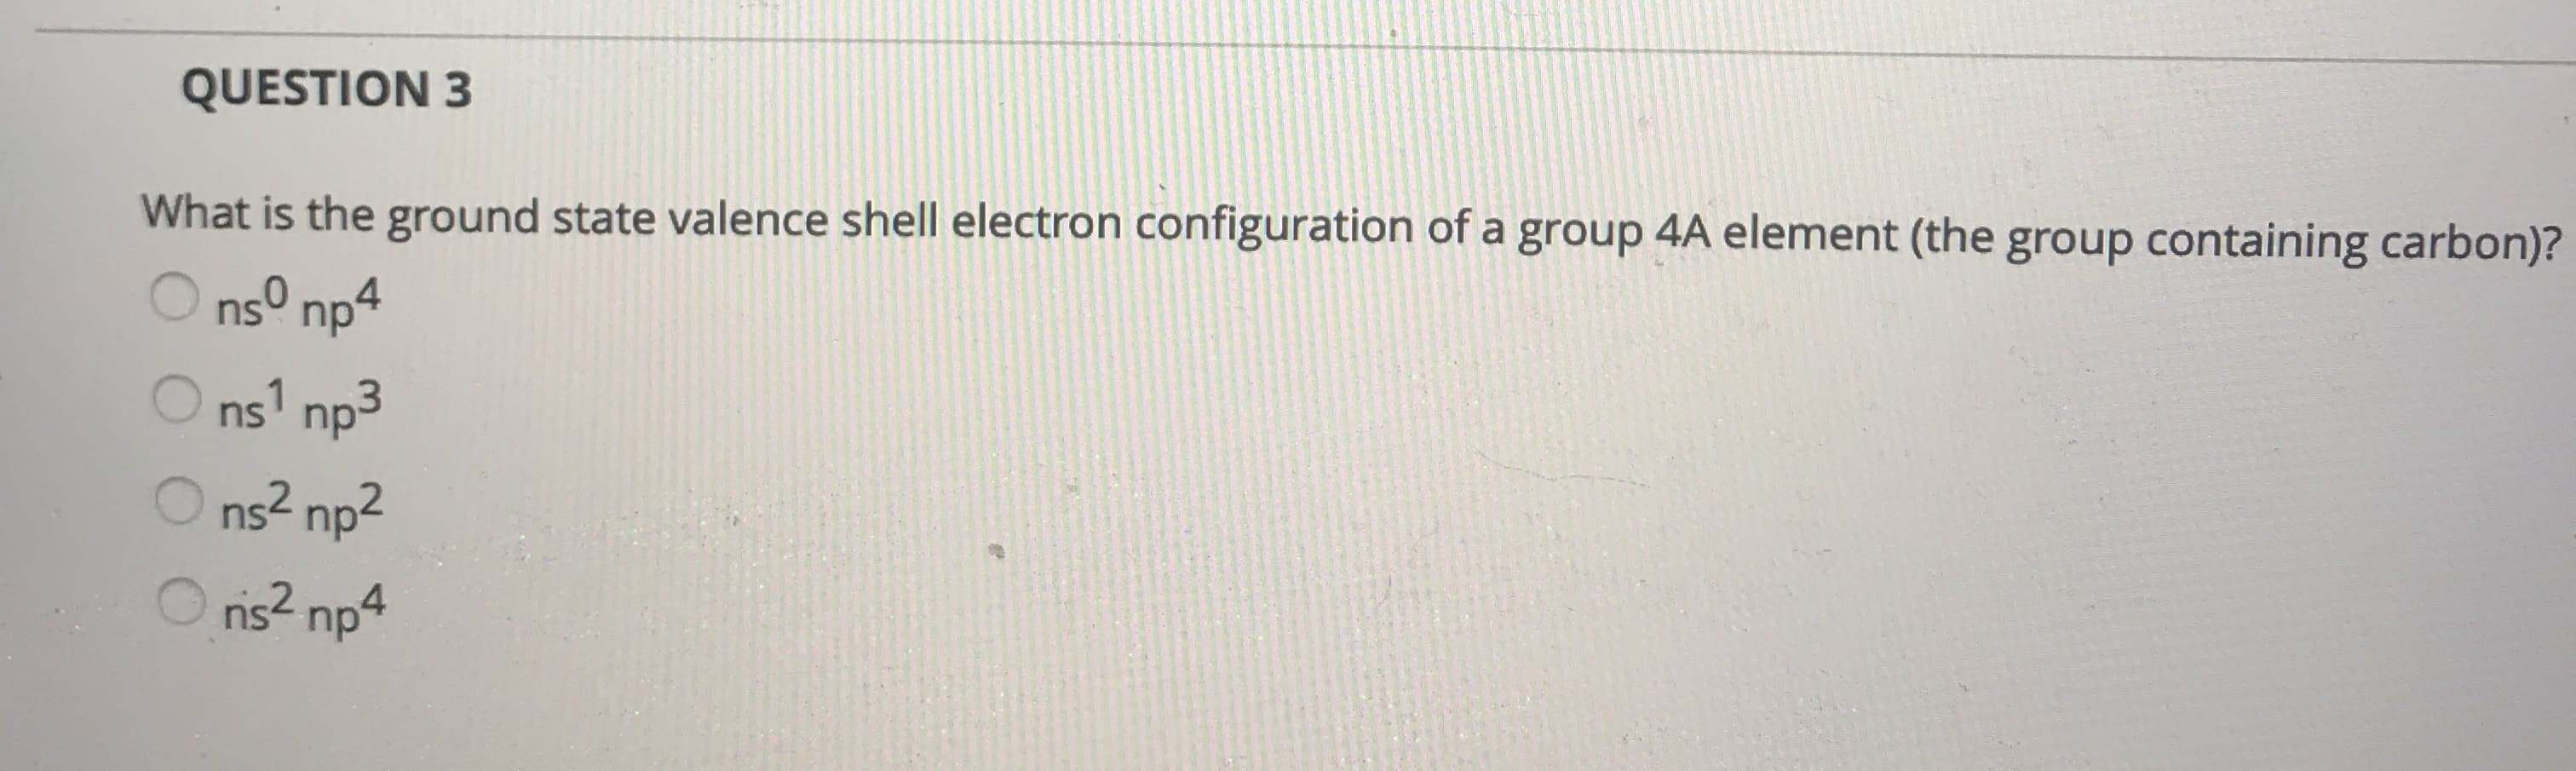 What is the ground state valence shell electron configuration of a group 4A element
